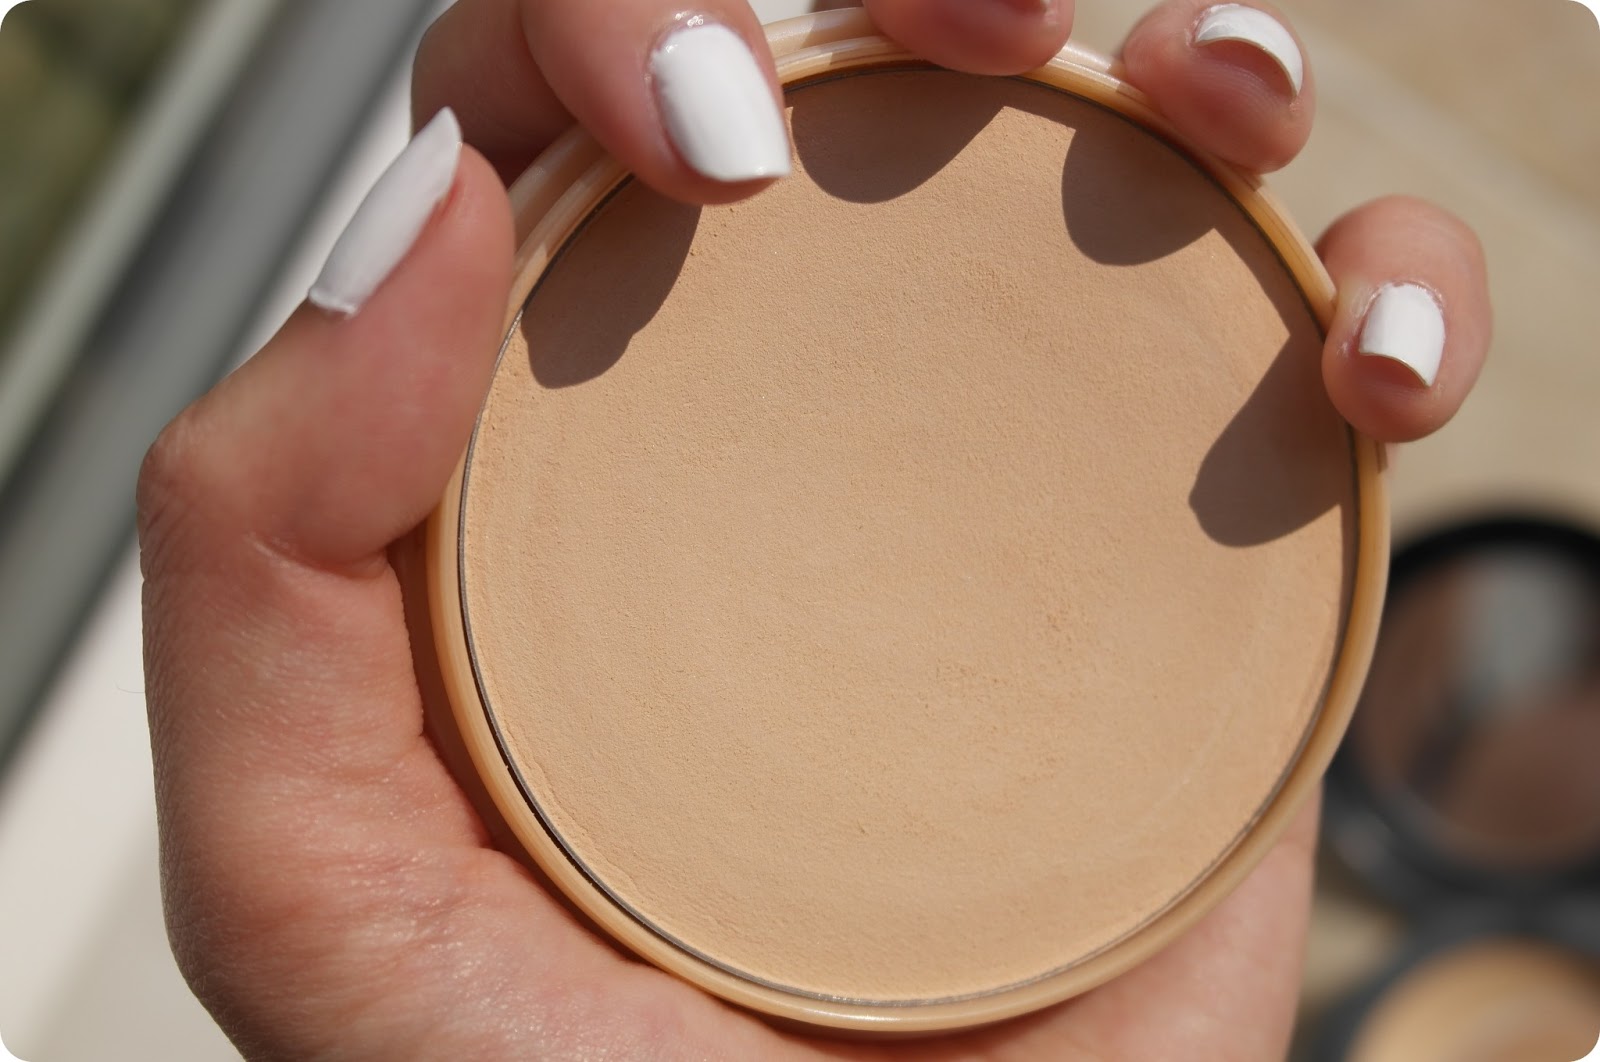 Rimmel Stay Matte Pressed Powder dupe, review and comparison